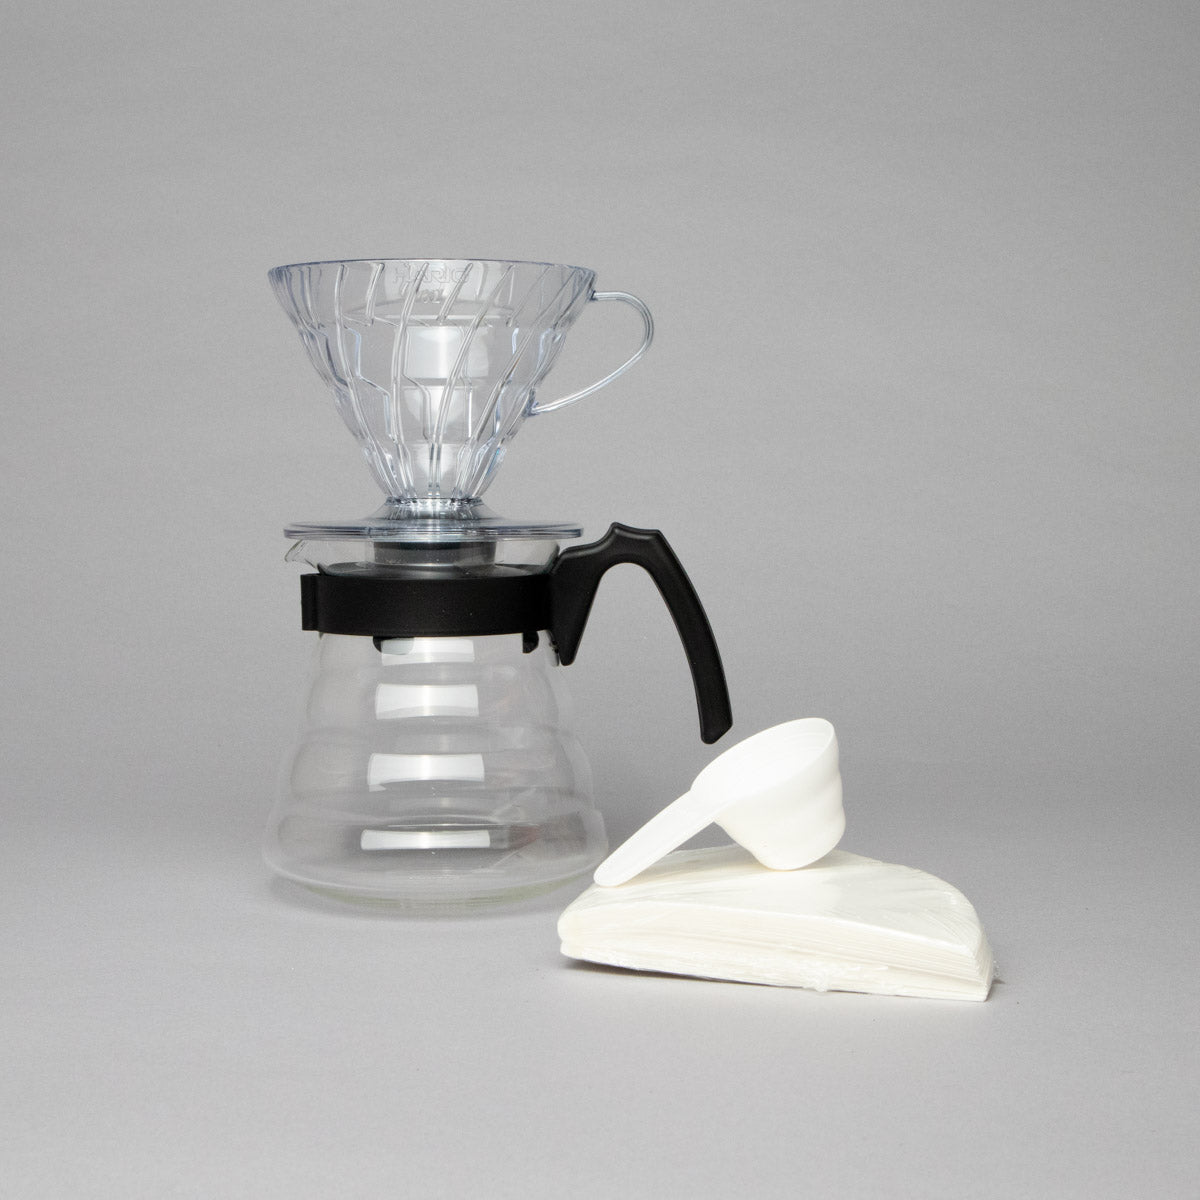 Craft Coffee Starter Gift Set: Hario Mini Mill Plus, V60 Craft Coffee Maker Kit and a 250g Bag of Specialty Coffee Beans